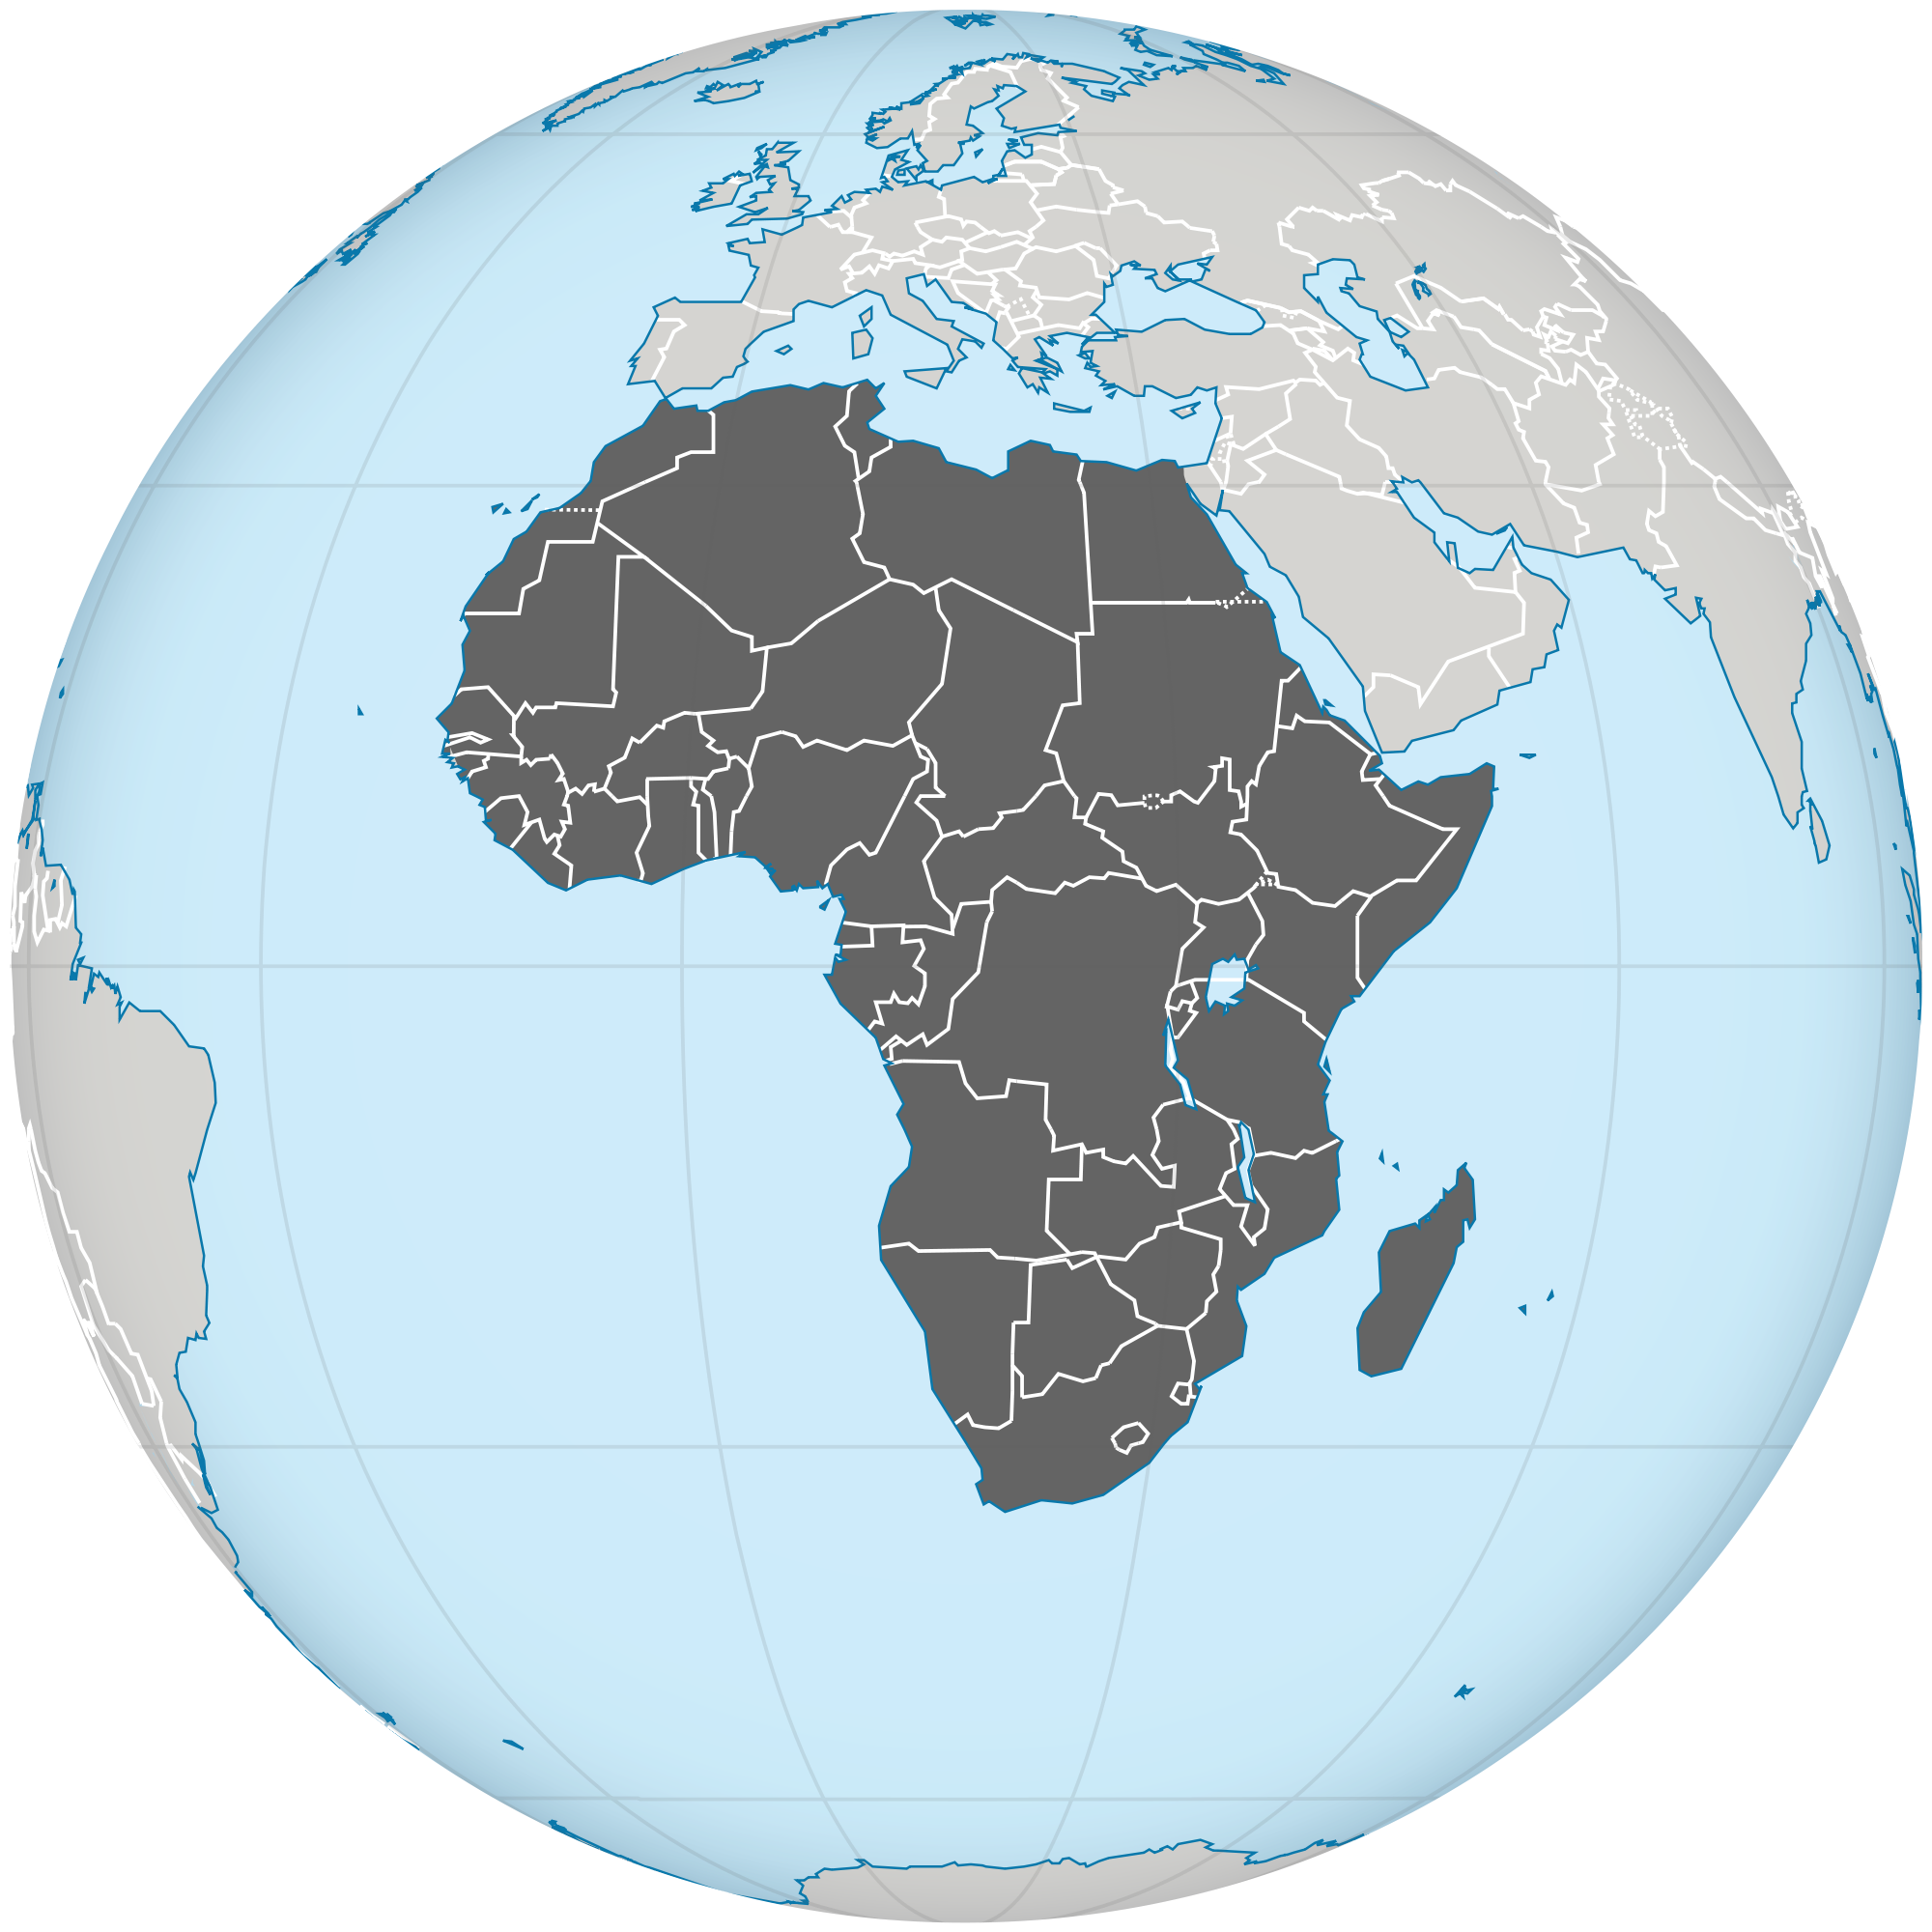 File:Africa on the globe (grey).svg - Wikimedia Commons